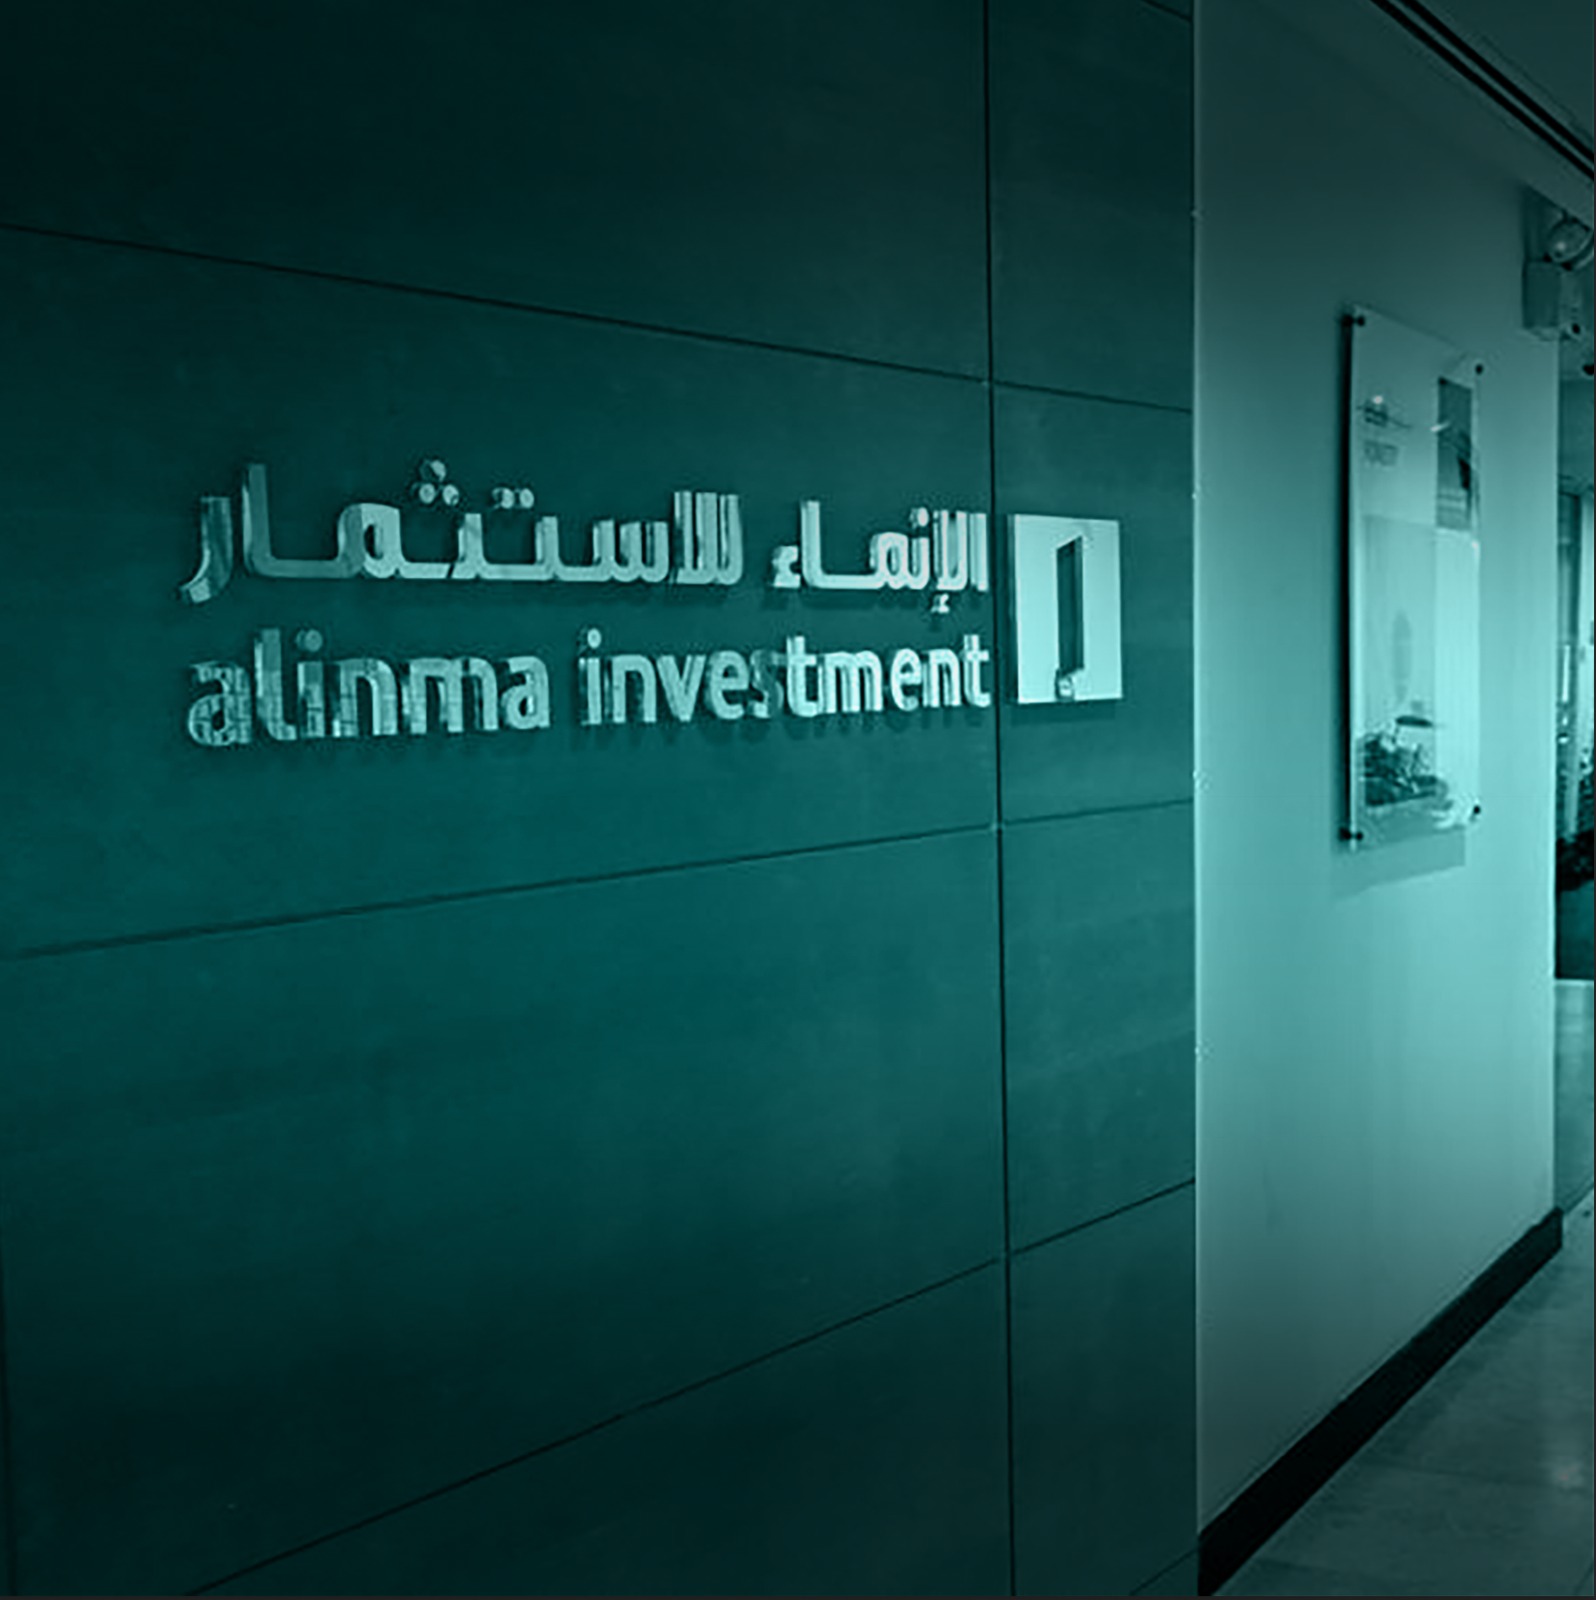 Announcement by Alinma Investment Company regarding call for a Meeting of the Fund’s unitholders of Alinma Multi Assets Balanced Fund.